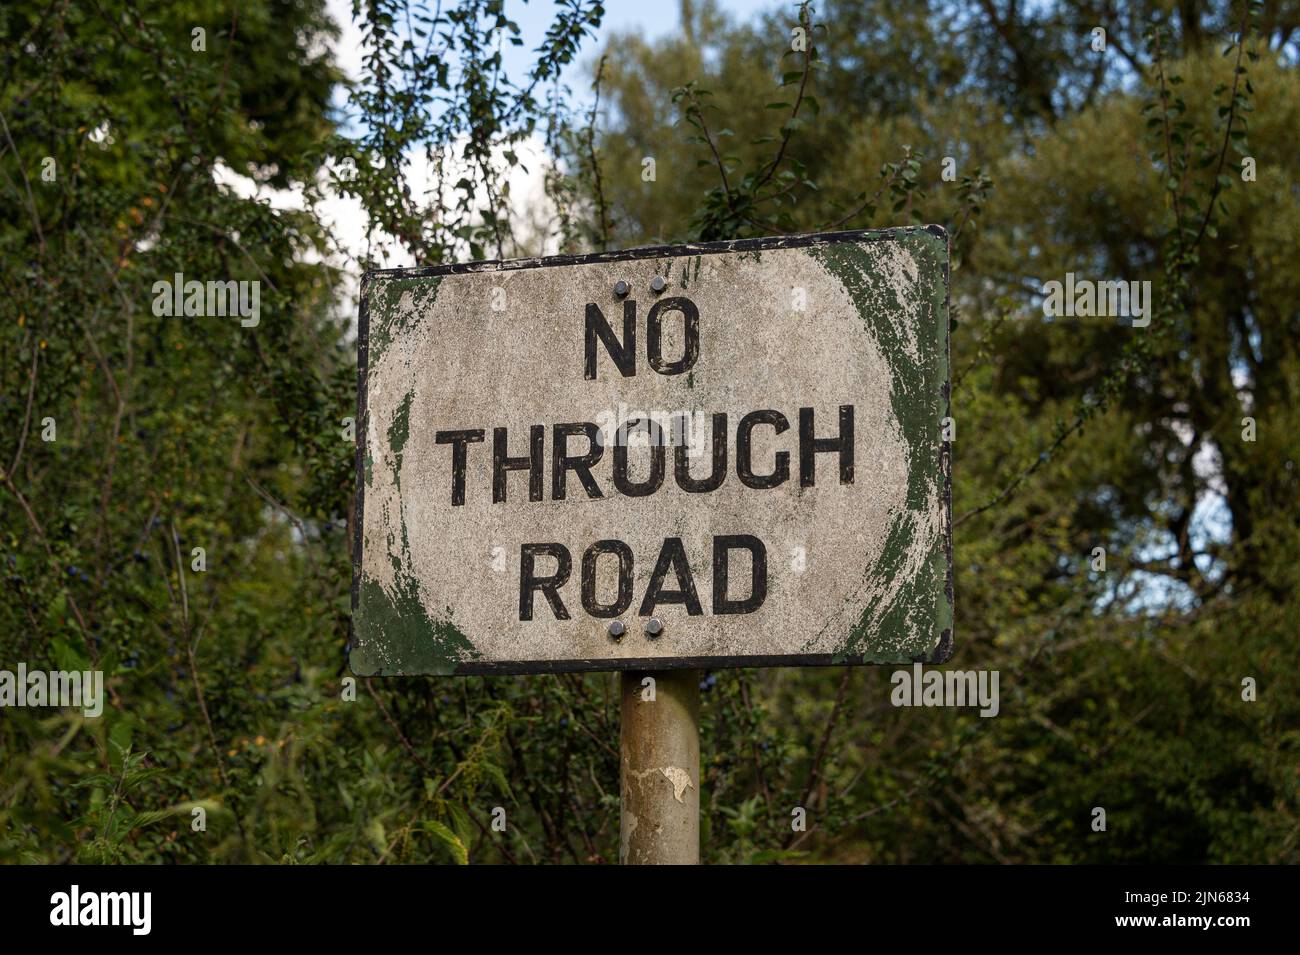 No through road sign, in the countryside. Stock Photo